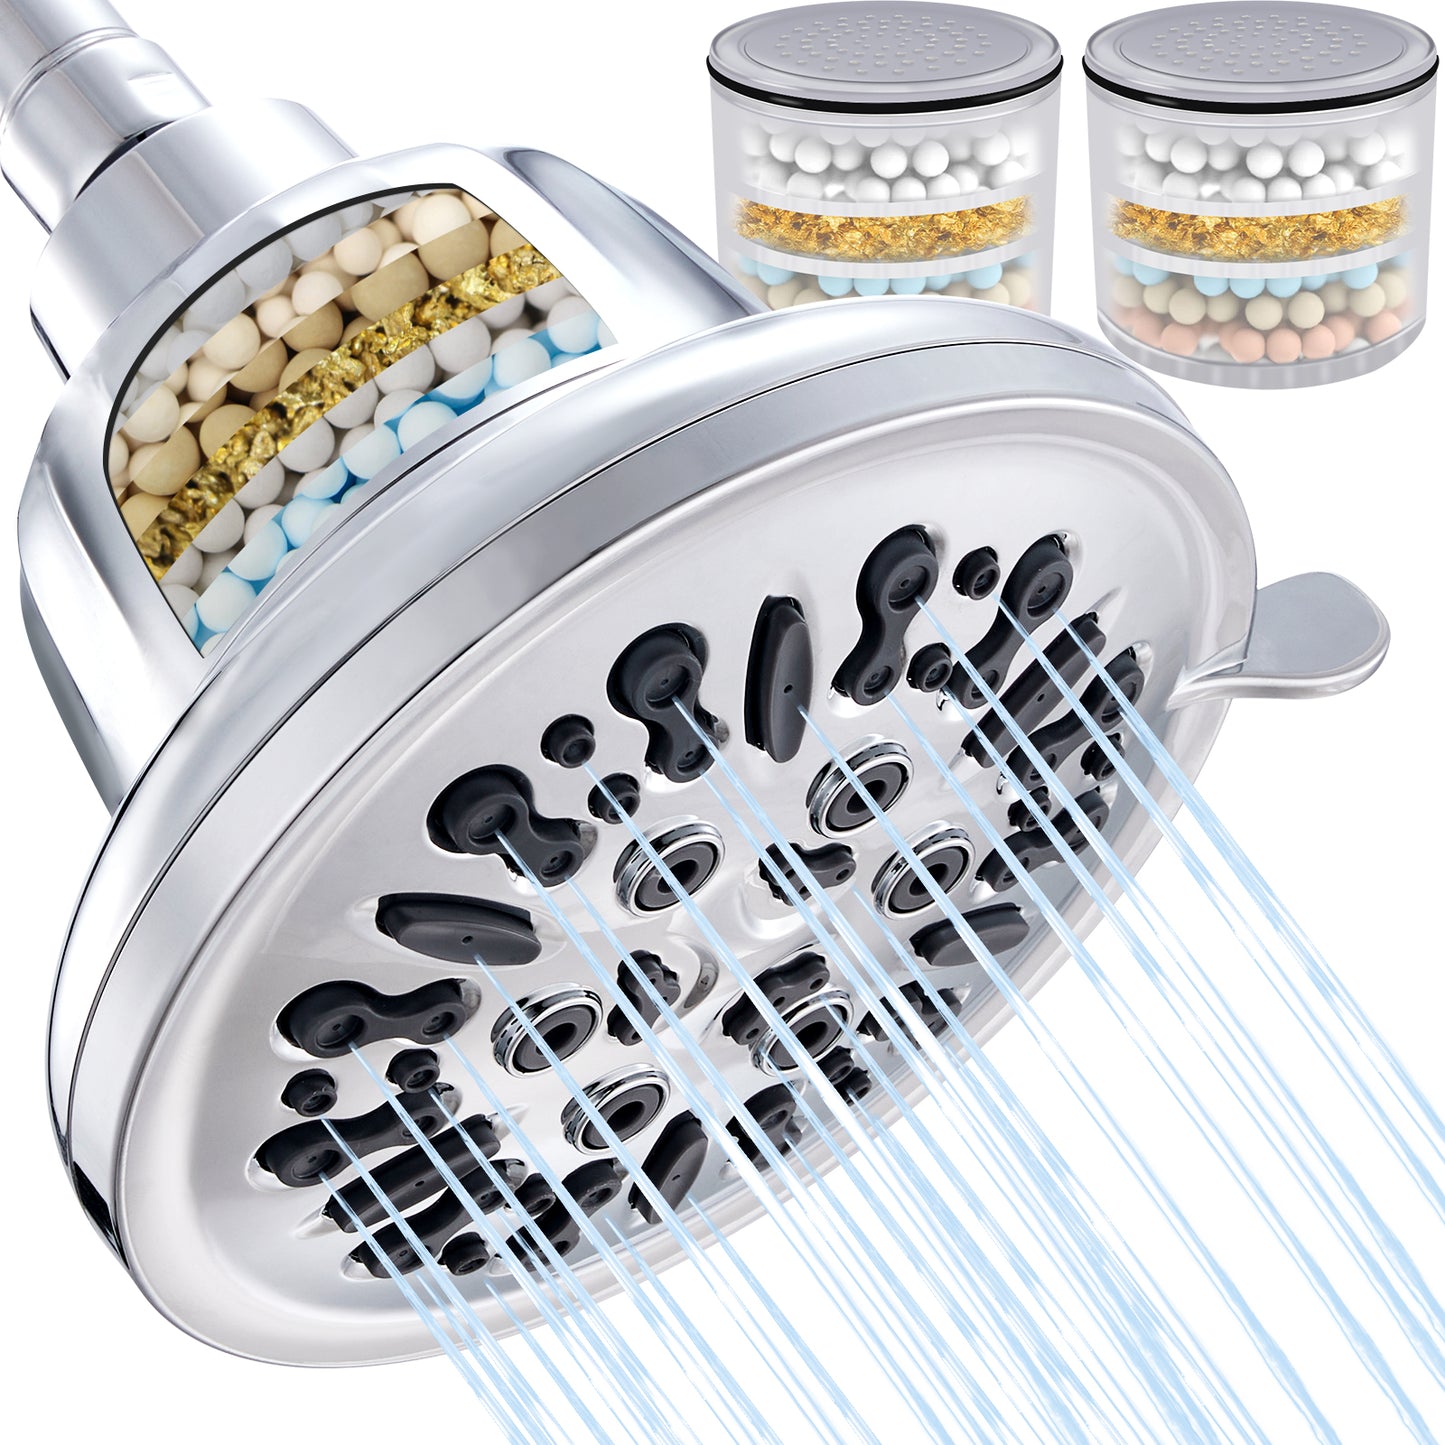 Filtered Shower Head, 5.5" Fixed High-Pressure Rain/Rainfall Shower Head for hard water, 6 Settings Water Softener Showerhead c]with Filter, Remove Chlorine and Heavy Metals